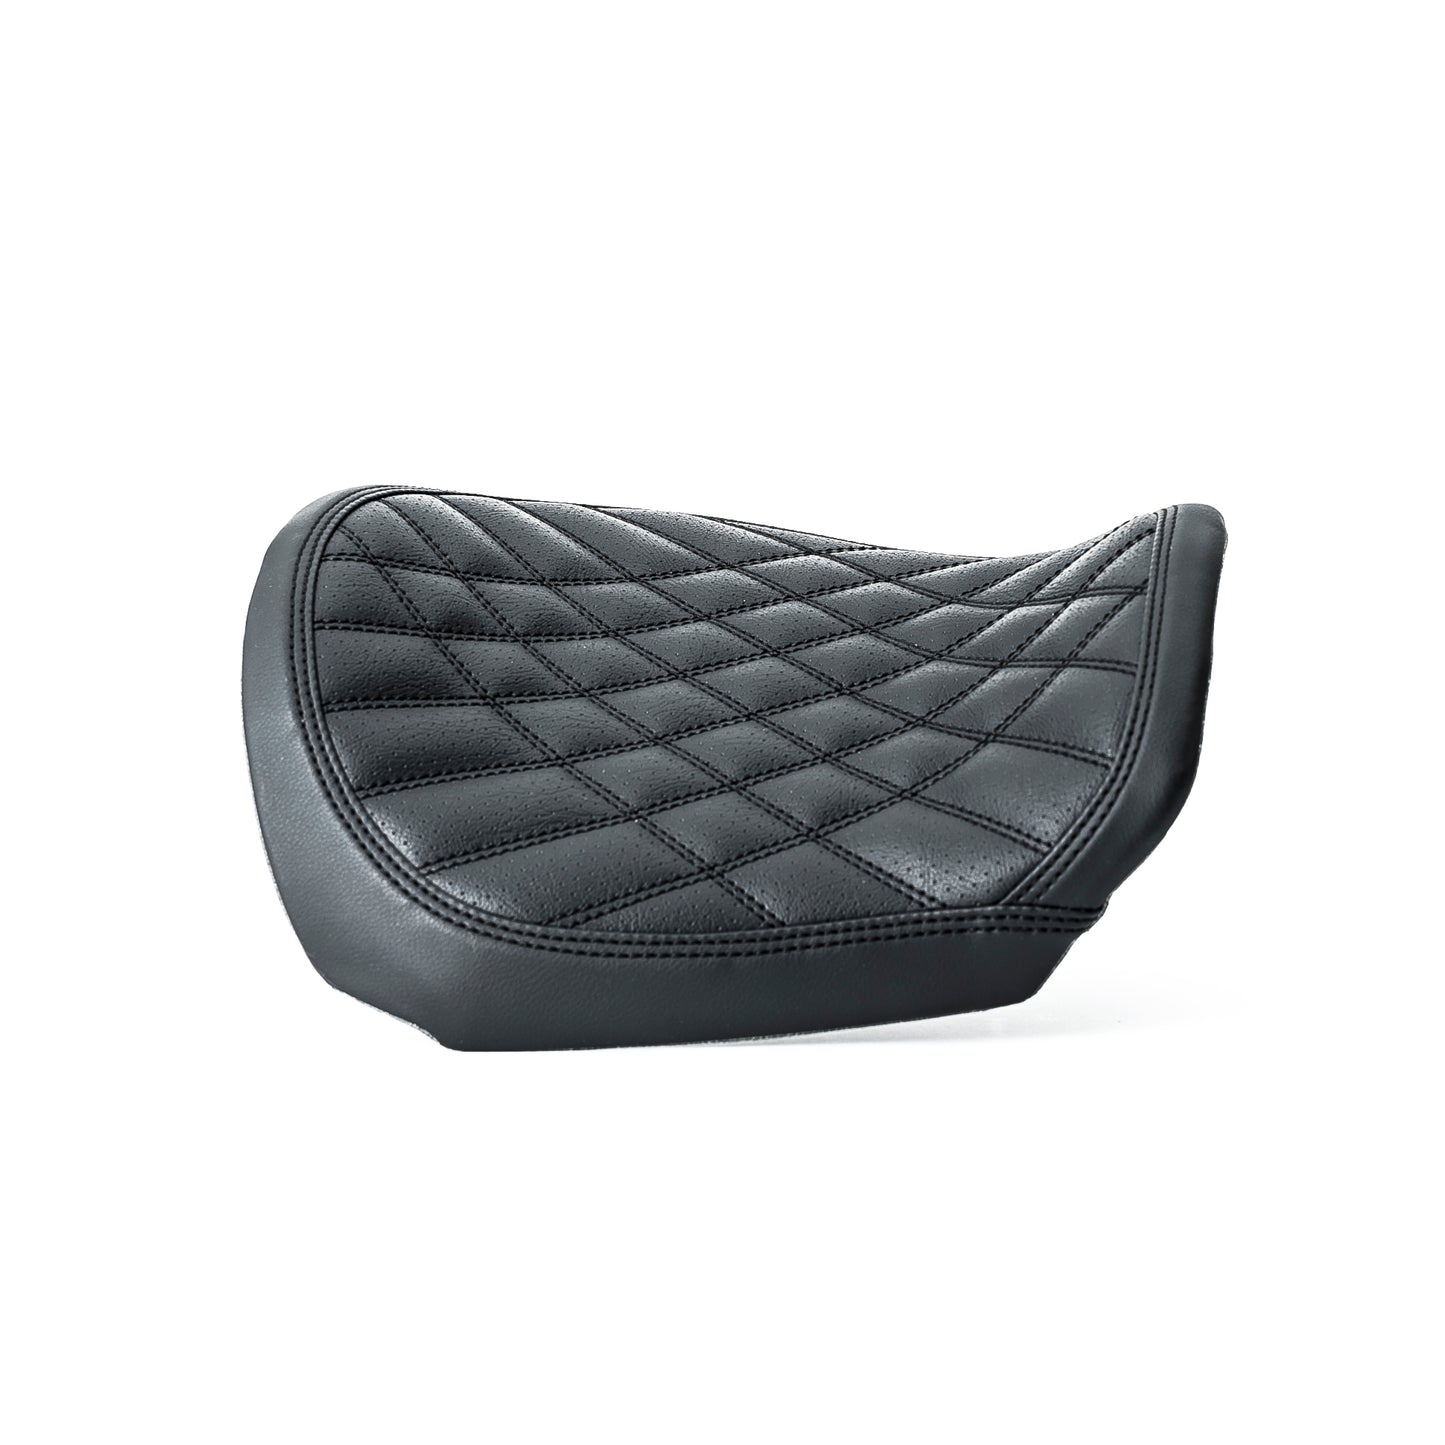 V-Rod Seat For "Short/Smooth Oval" Rear Fenders